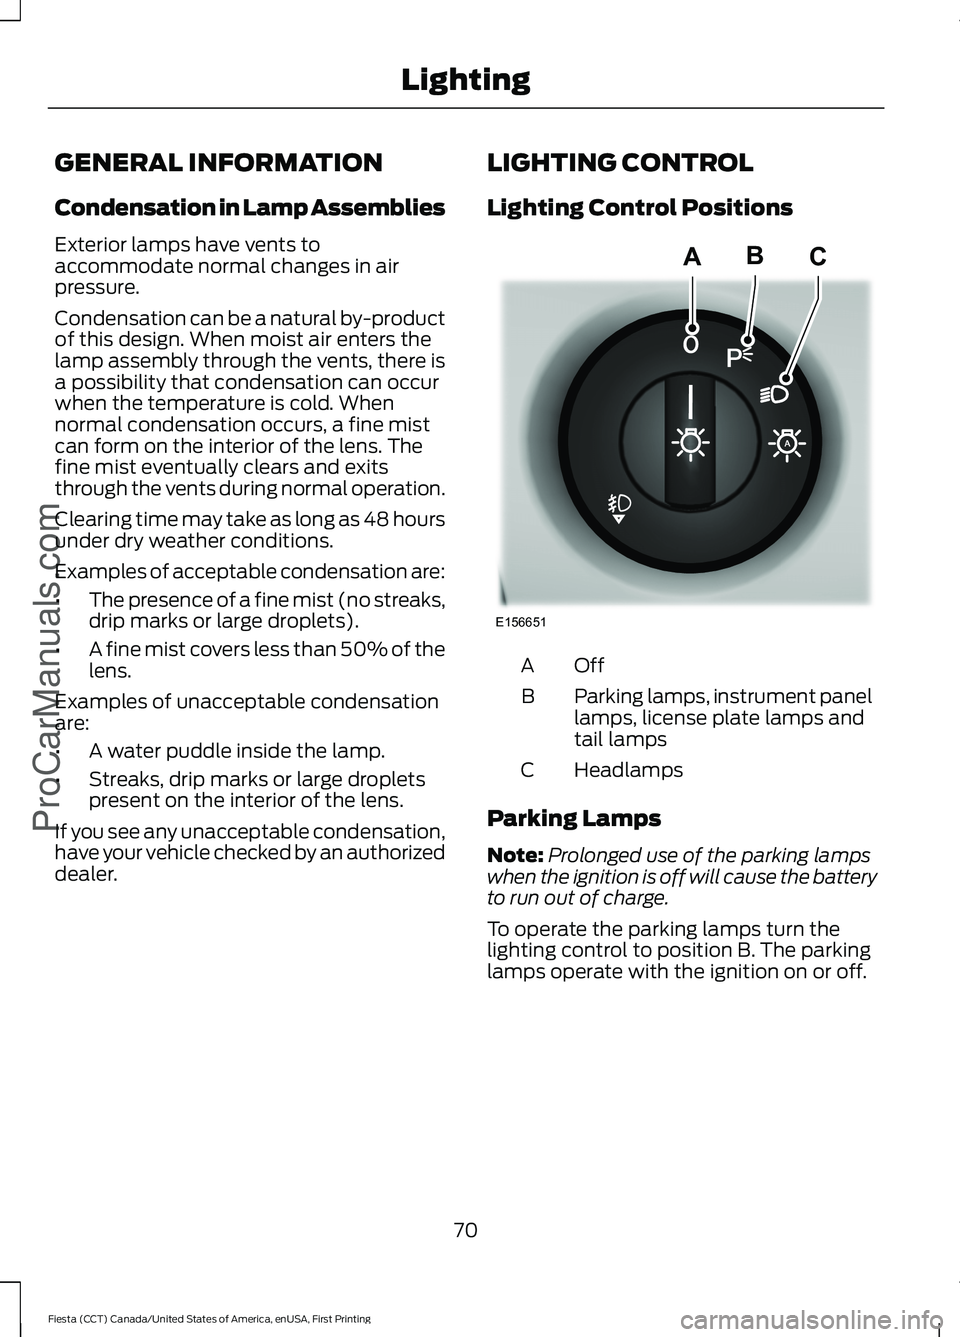 FORD FIESTA 2016 Manual PDF GENERAL INFORMATION
Condensation in Lamp Assemblies
Exterior lamps have vents to
accommodate normal changes in air
pressure.
Condensation can be a natural by-product
of this design. When moist air ent